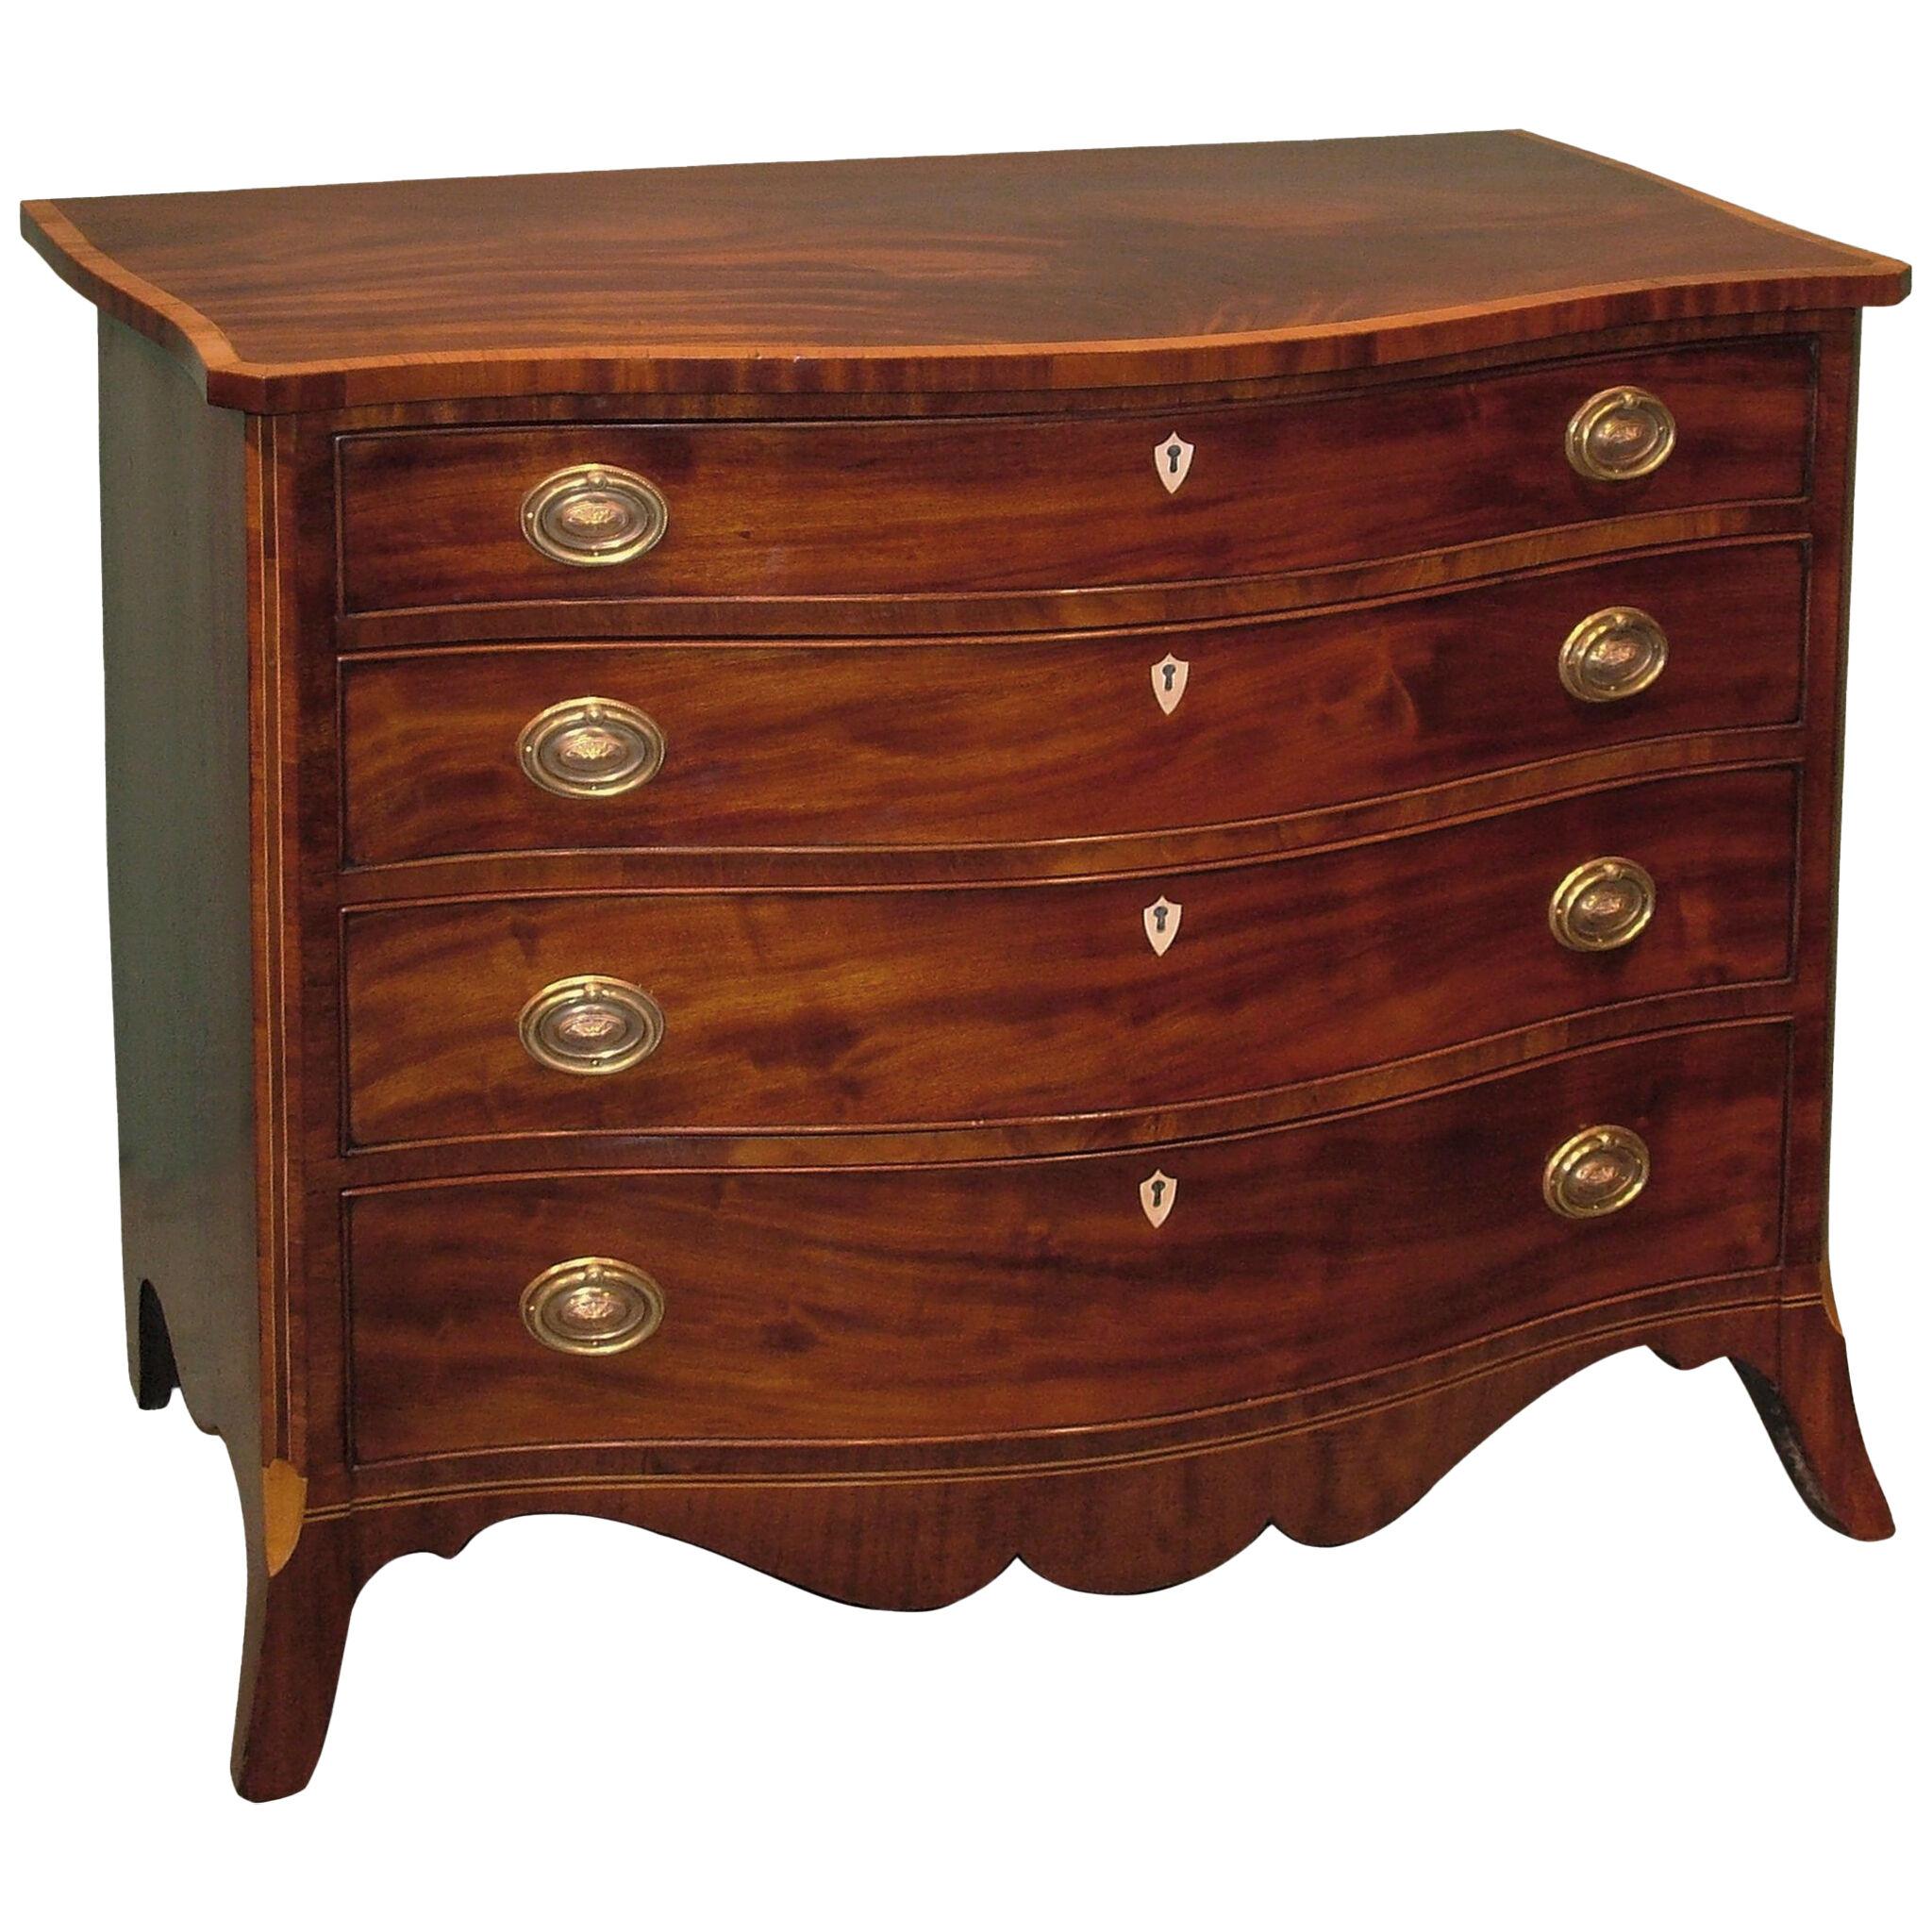 A Mid-18th Century George III Period Mahogany Serpentine Chest of Drawers